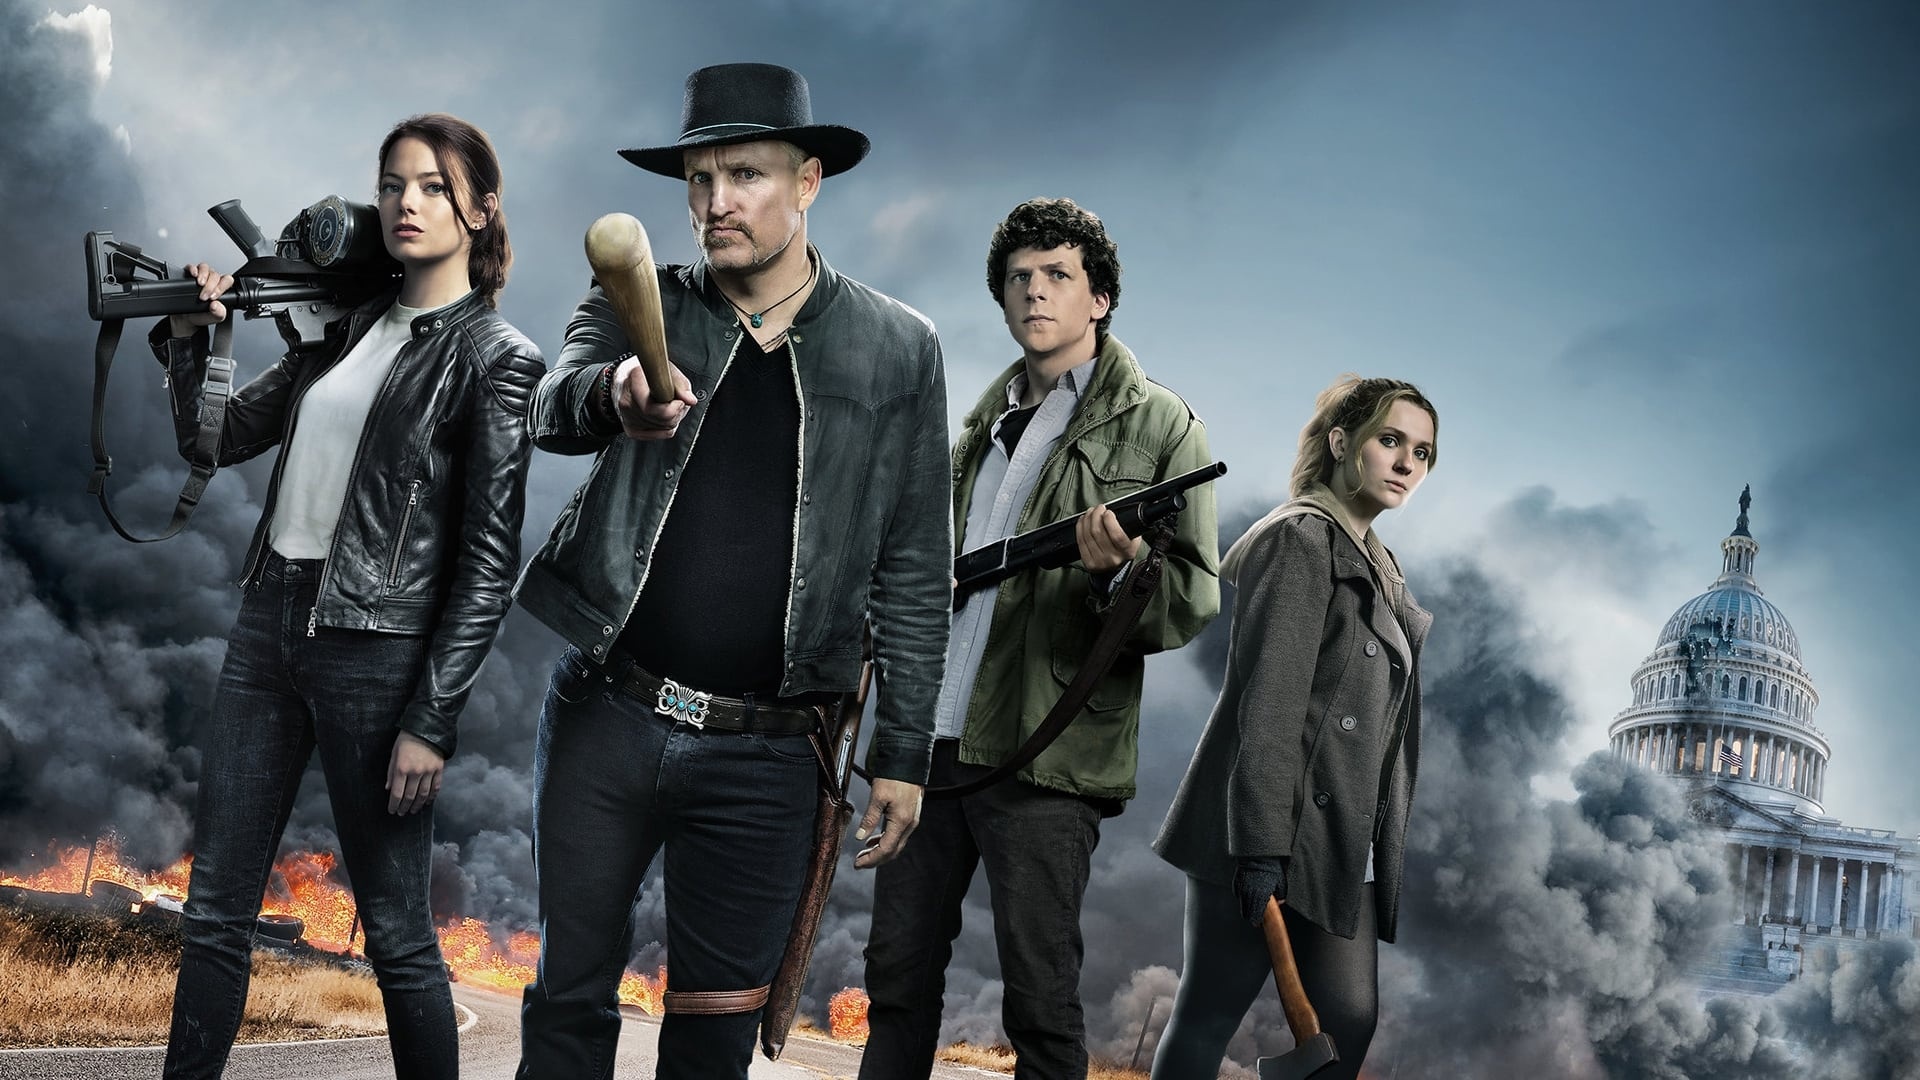 Zombieland: A sequel, Double Tap, was released in October 2019. 1920x1080 Full HD Background.